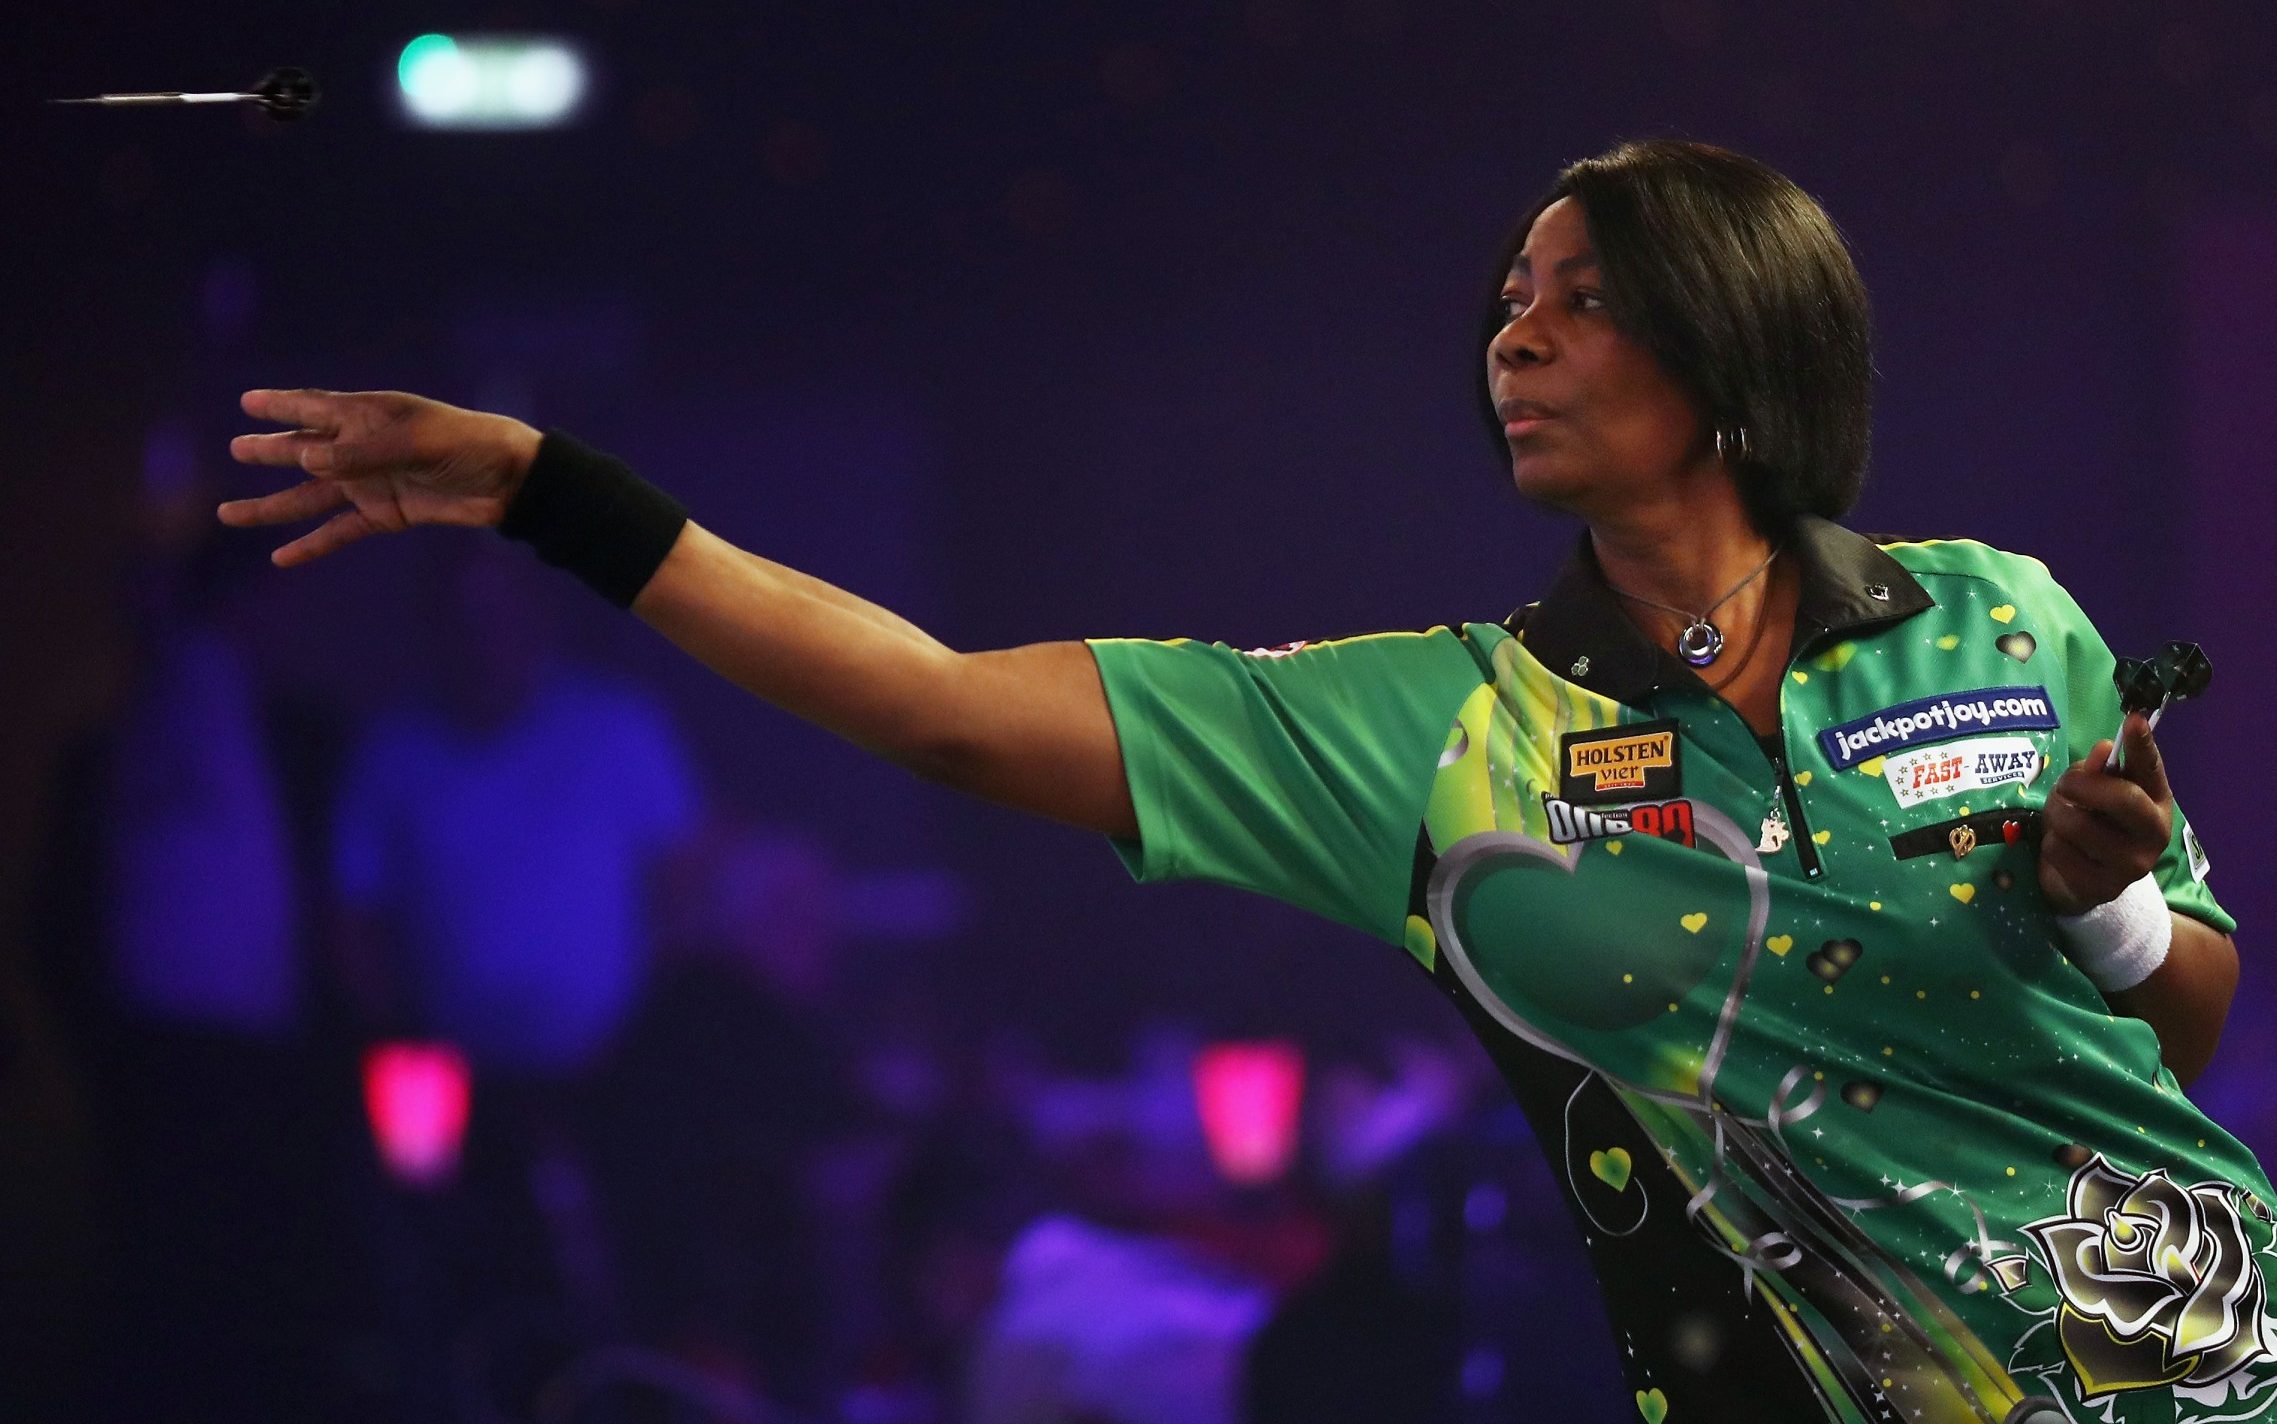 british darts player forfeits tournament rather than face transgender opponent